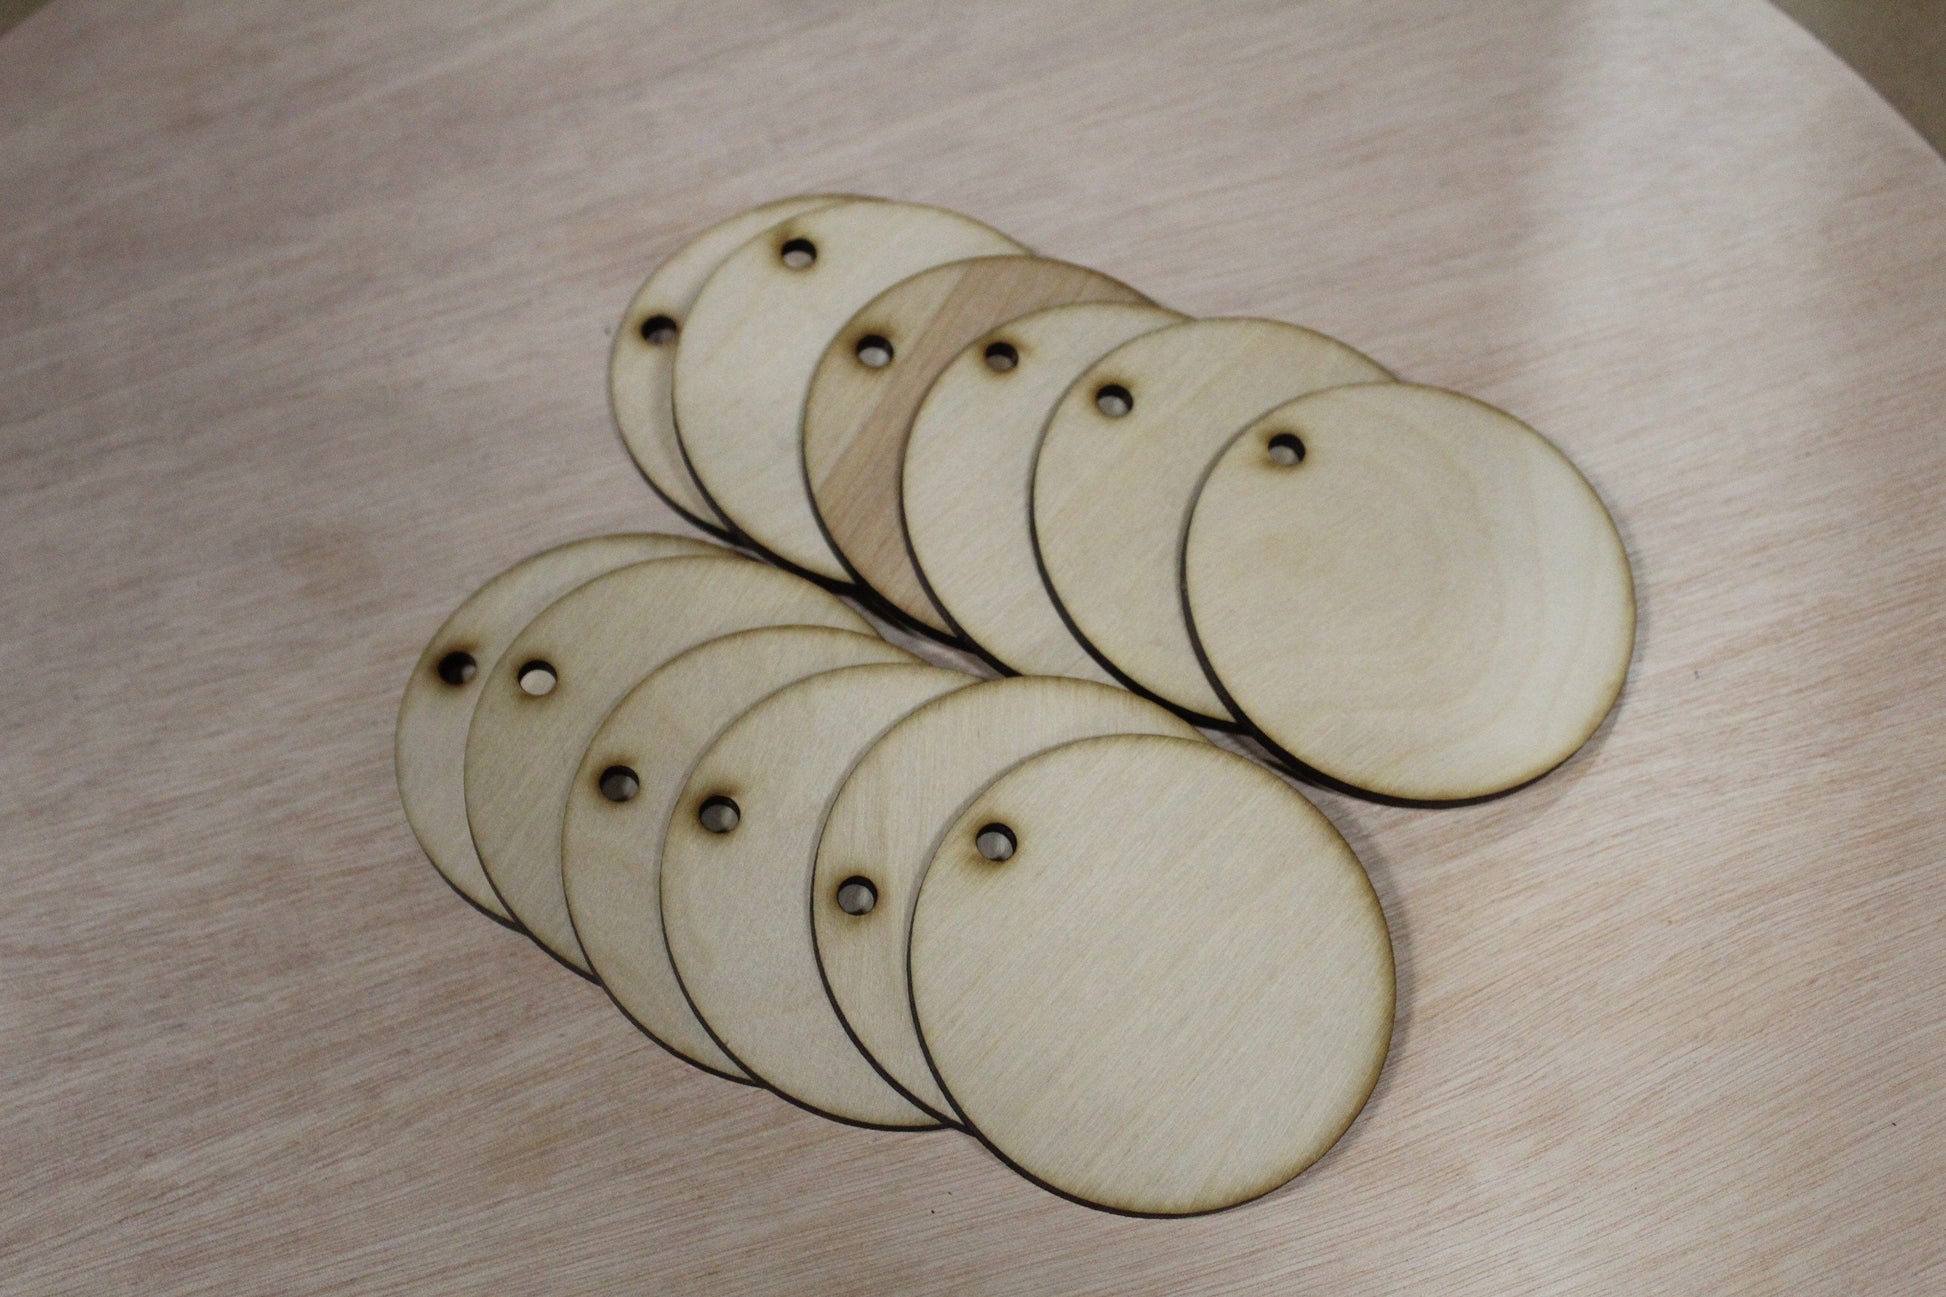 Blank Set of Wooden Laser Cut Ornaments Set of 12 Wooden Birch Round DIY Party Christmas Festive Tis The Season Craft Coloring 3in